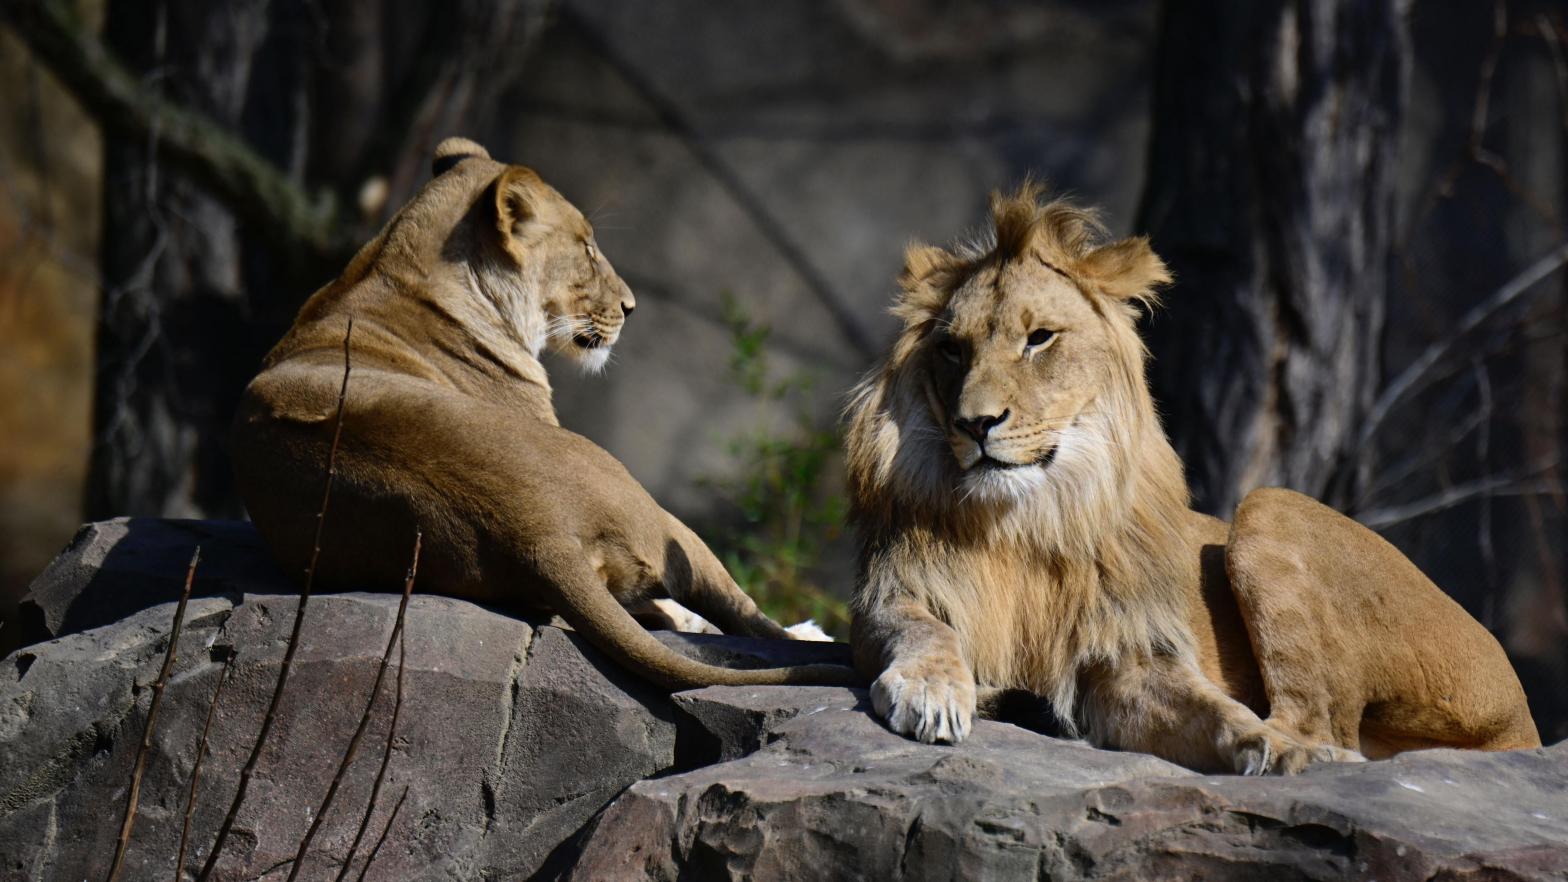 Lions in an enclosure at the Berlin Zoo. (Photo: TOBIAS SCHWARZ/AFP, Getty Images)